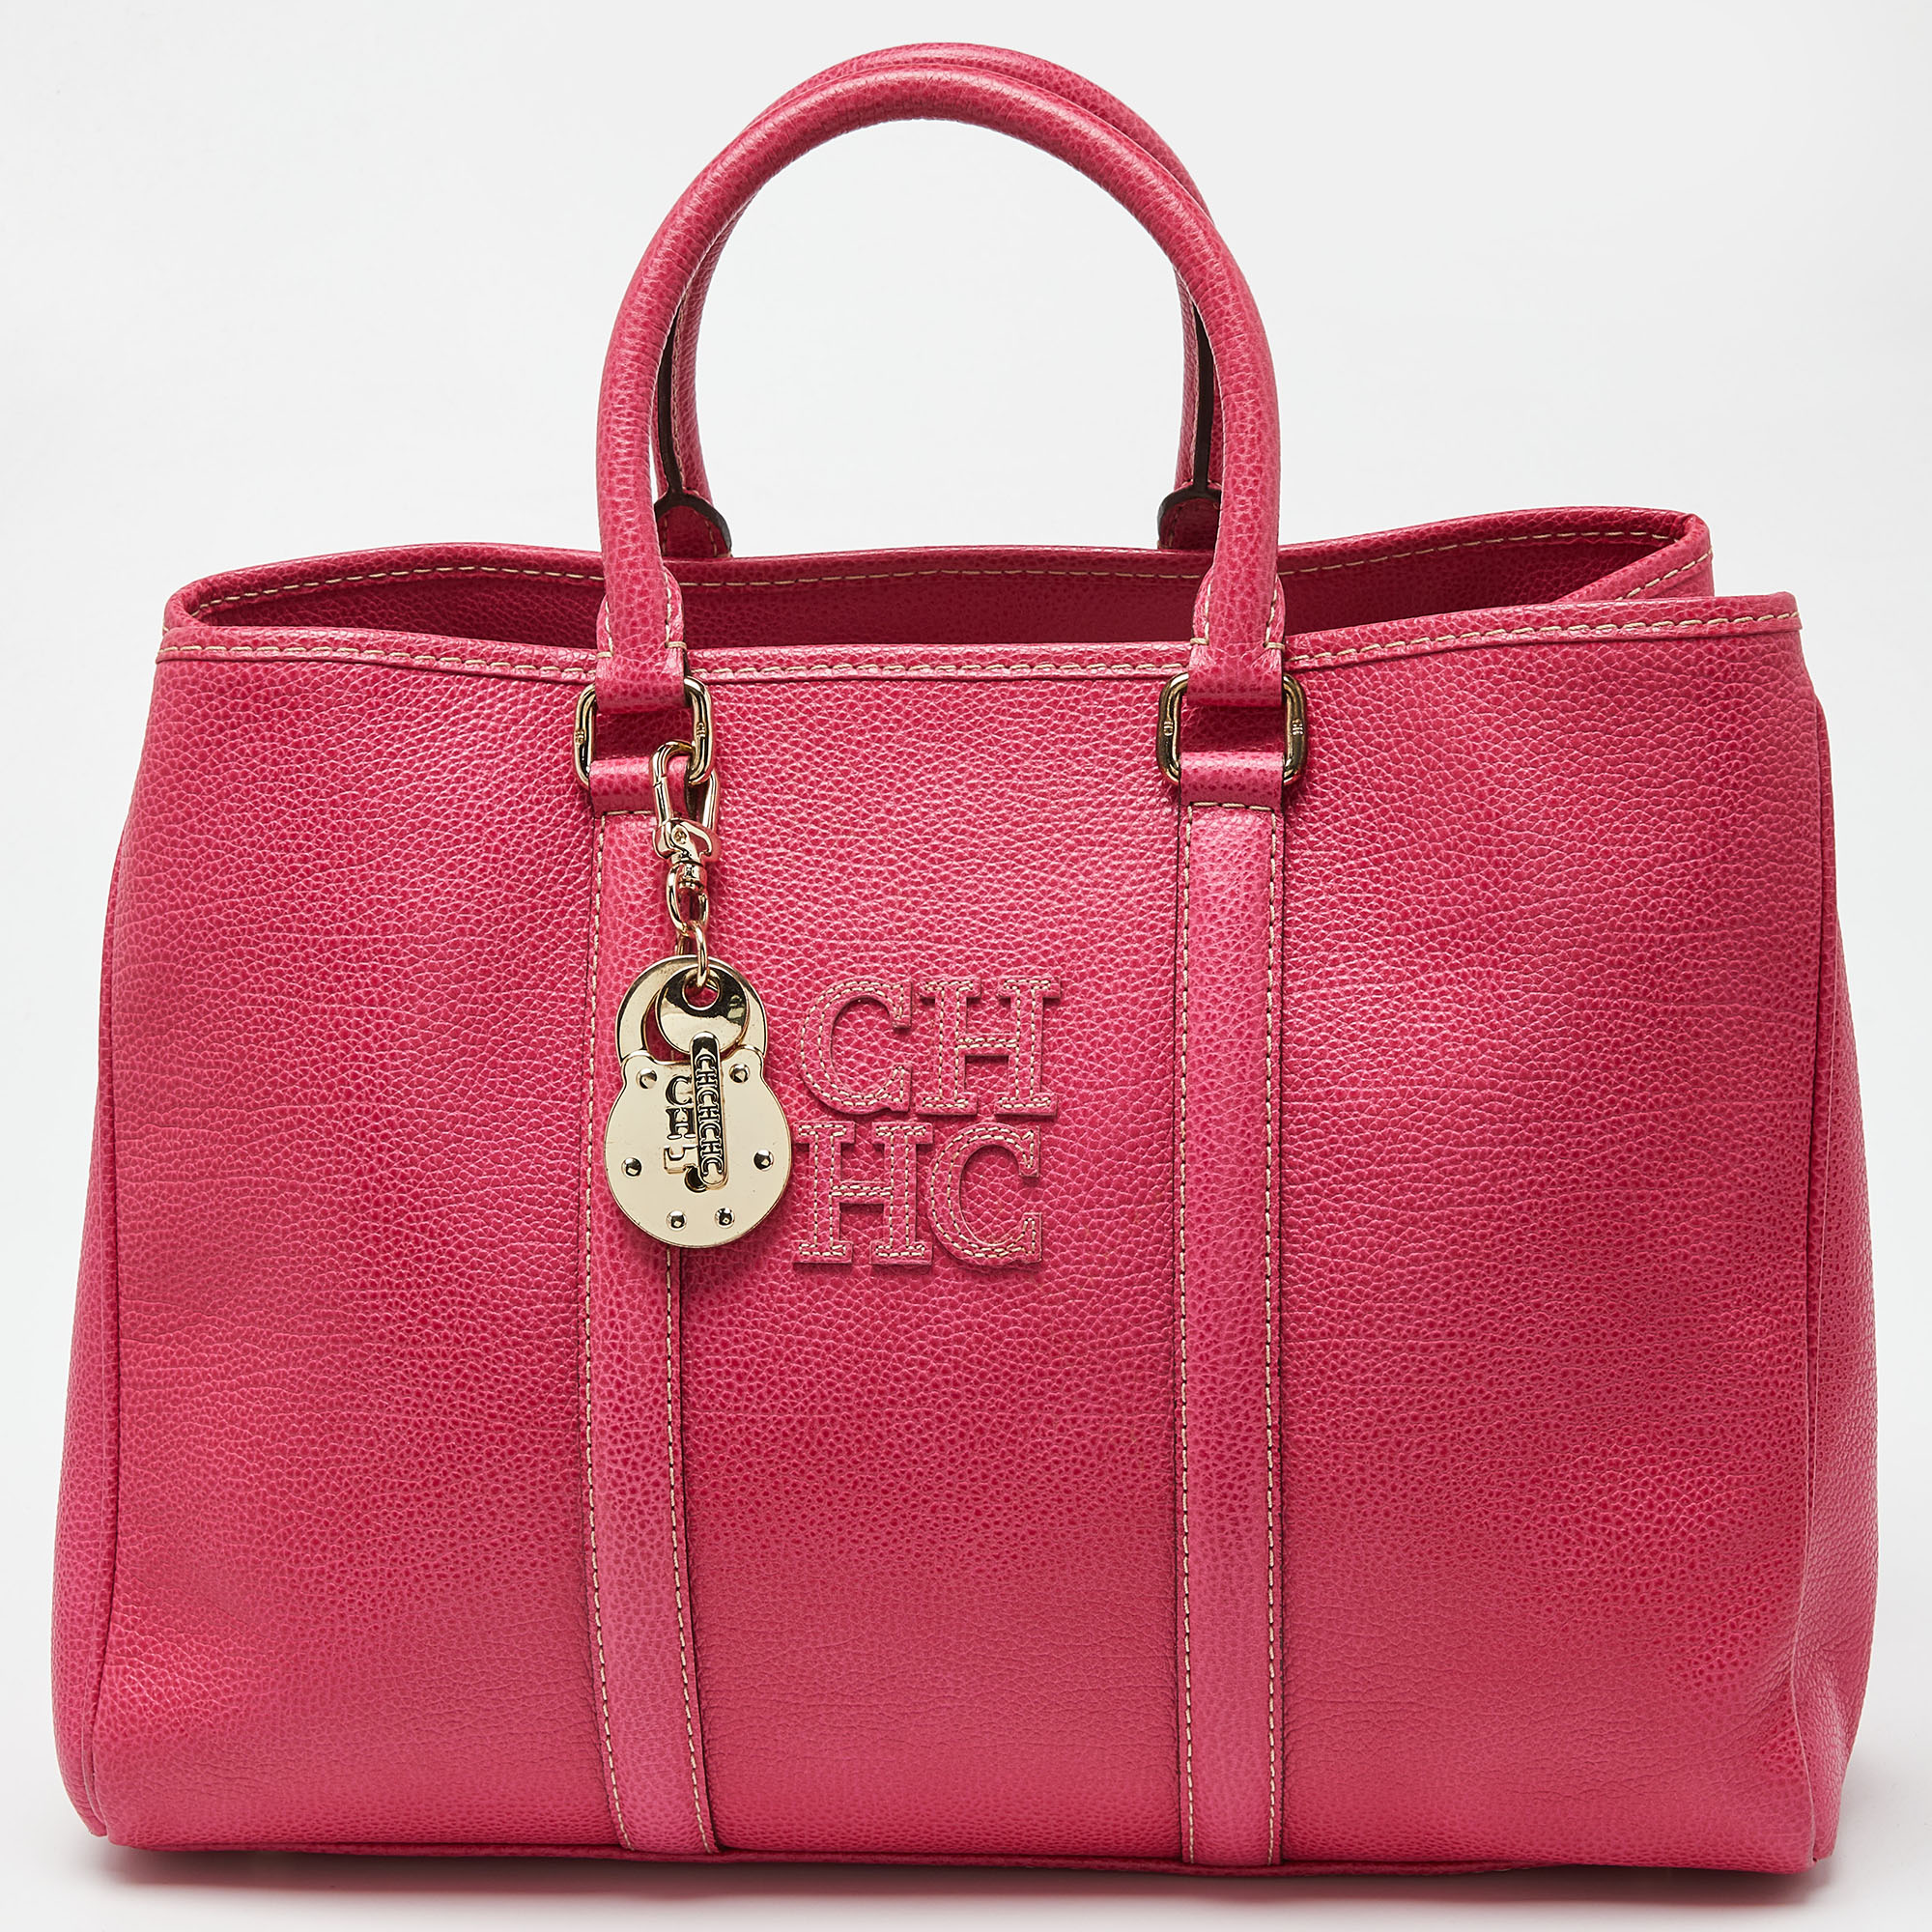 Pre-owned Ch Carolina Herrera Pink Grained Leather Matteo Tote